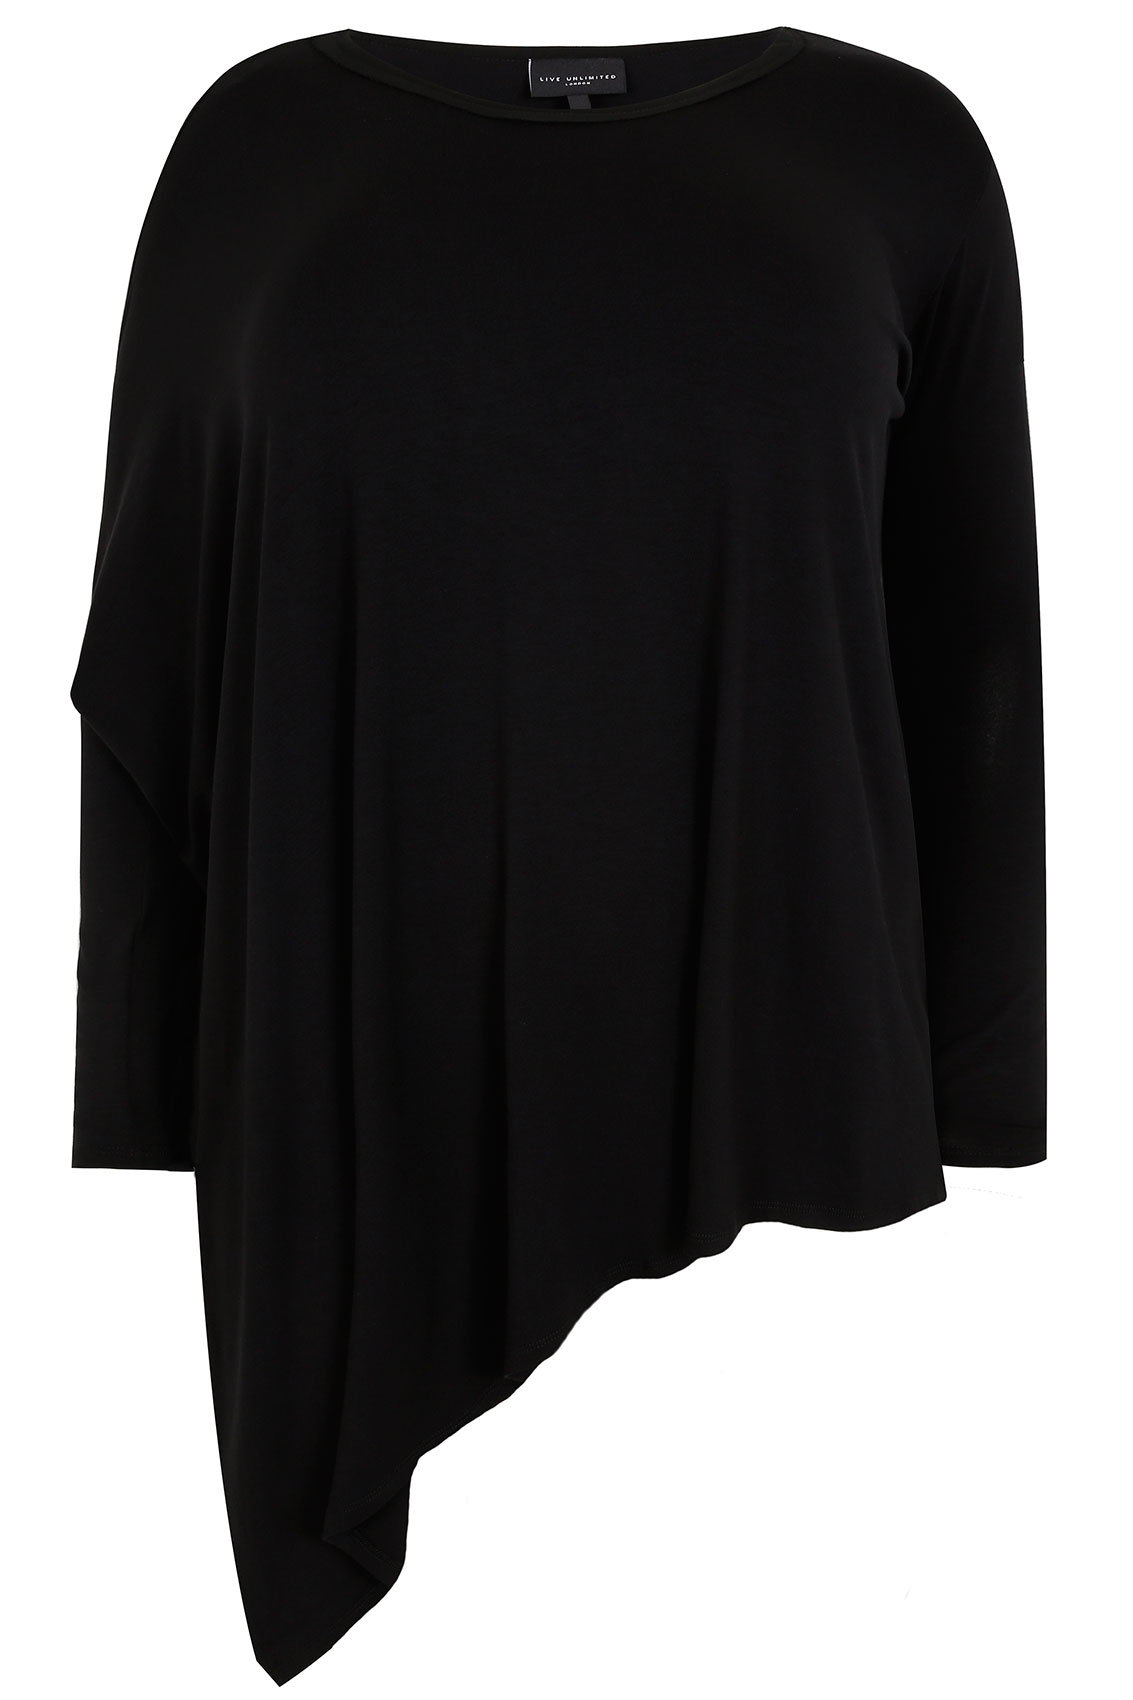 LIVE UNLIMITED Black Asymmetric Long Sleeve Jersey Top Plus Size 16 to 28